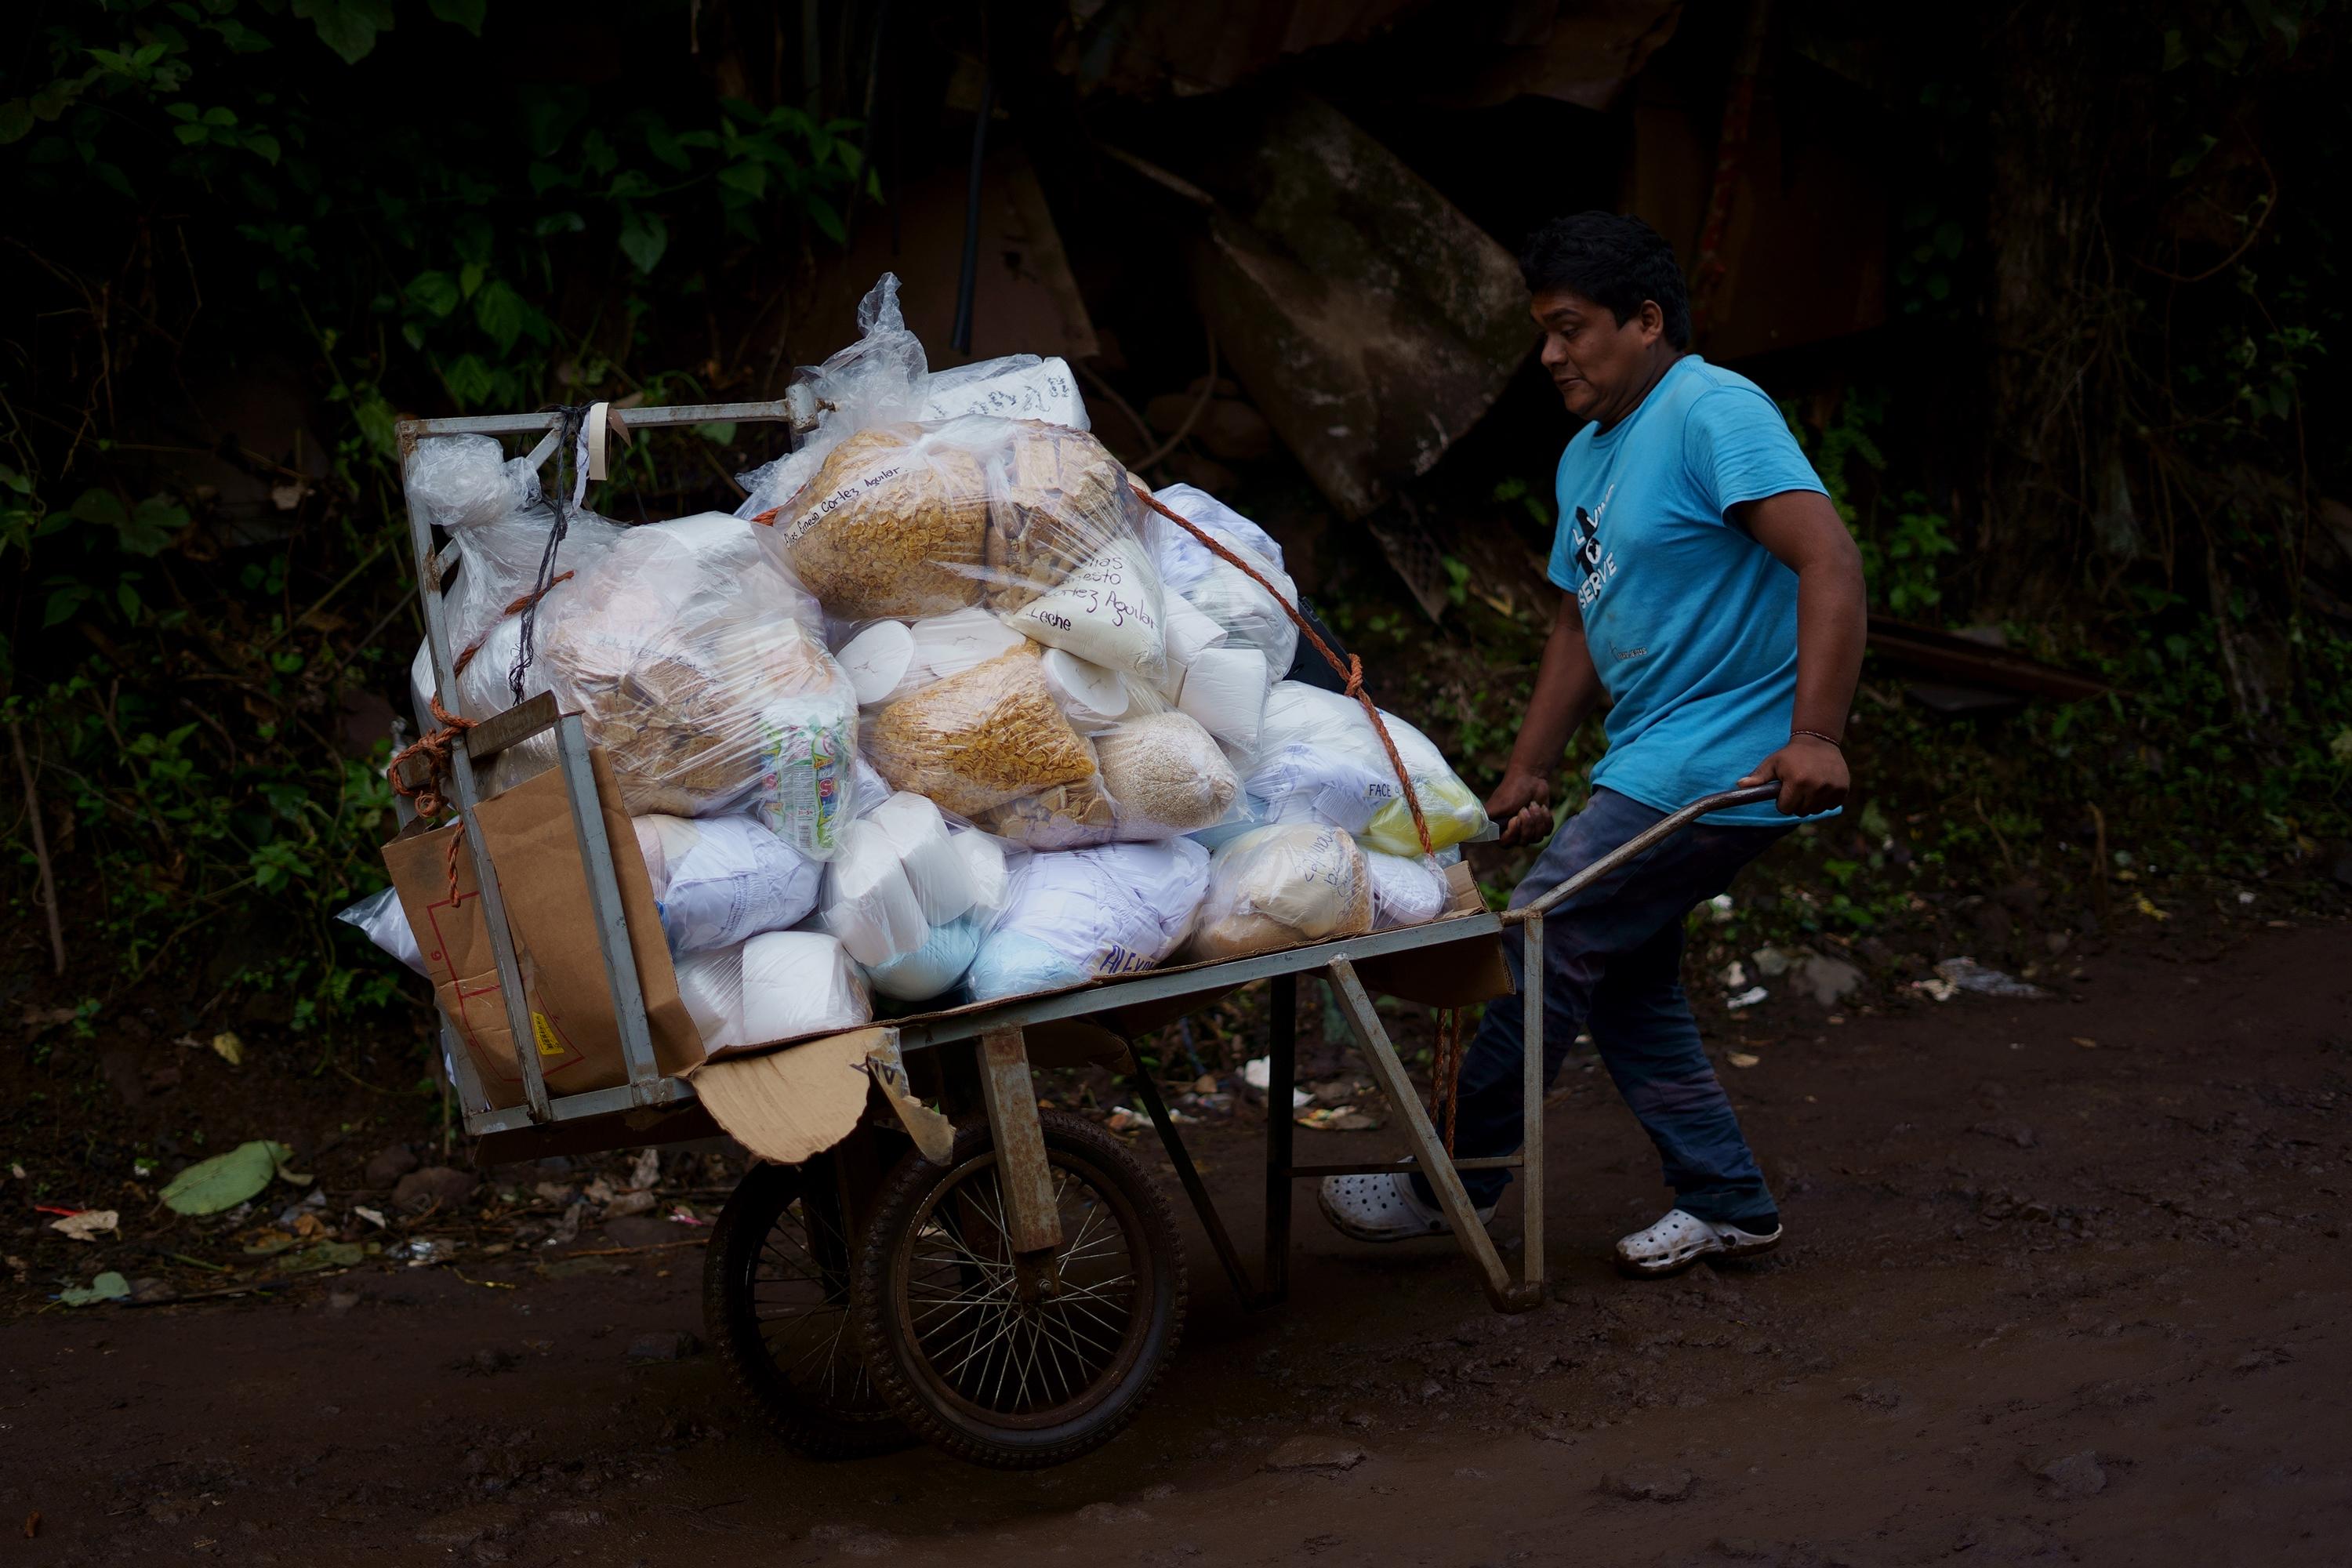 Cristian, 20, has spent the last ten years working at Izalco Prison, transporting packages for family members. His cart can hold 15 bags, and he charges $2.00 per bag, per trip. Before, he was lucky to make one trip a day with a full cart; now he makes three. A boombox attached to his cart plays reggaeton as he walks the two kilometers to the prison entrance. “So my customers don’t get bored,” he says, laughing.